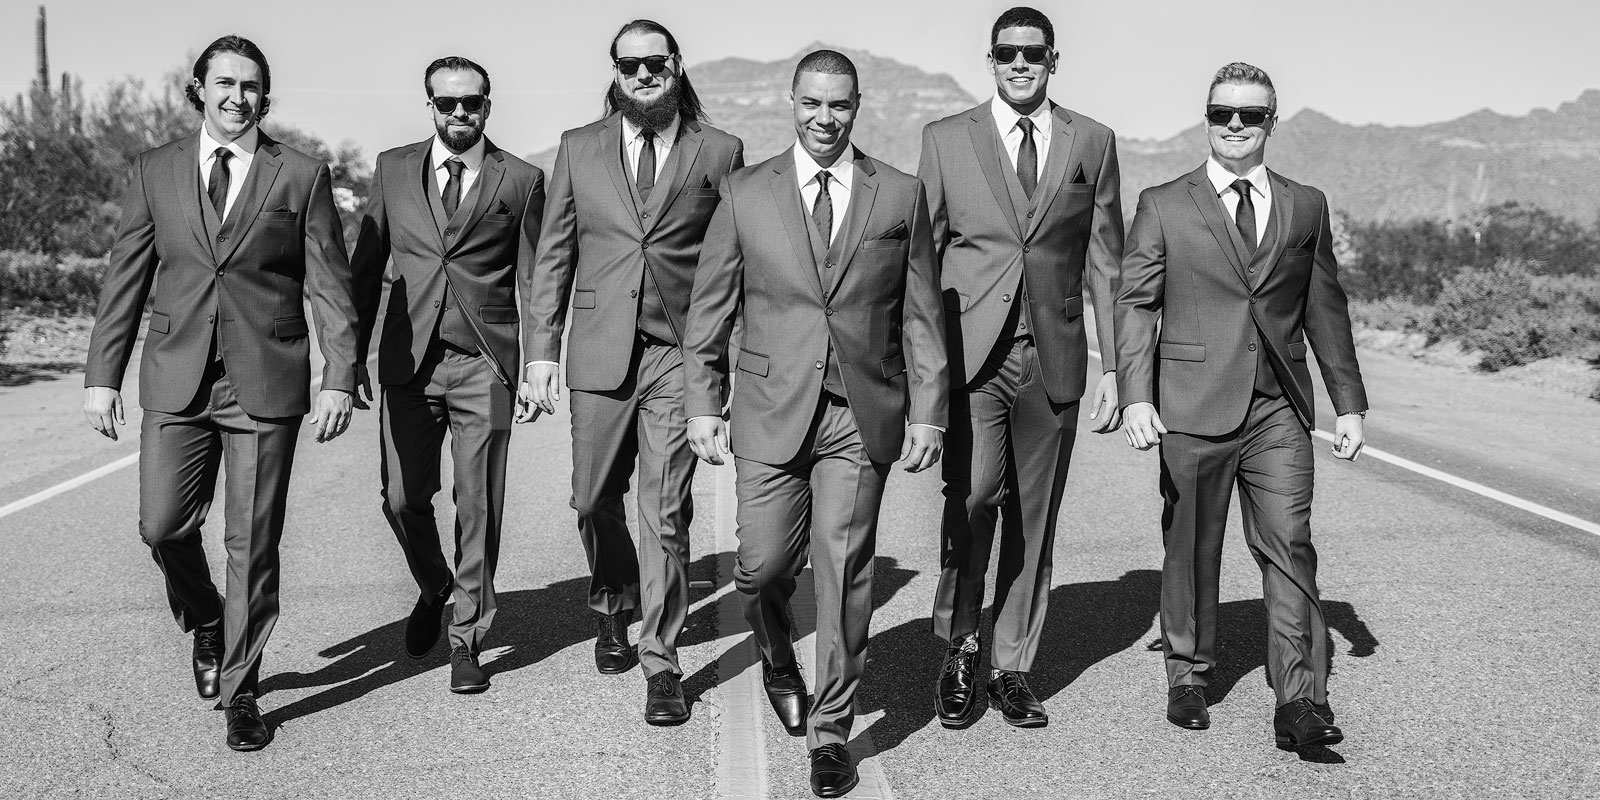 Justin and his groomsmen walking down the road.